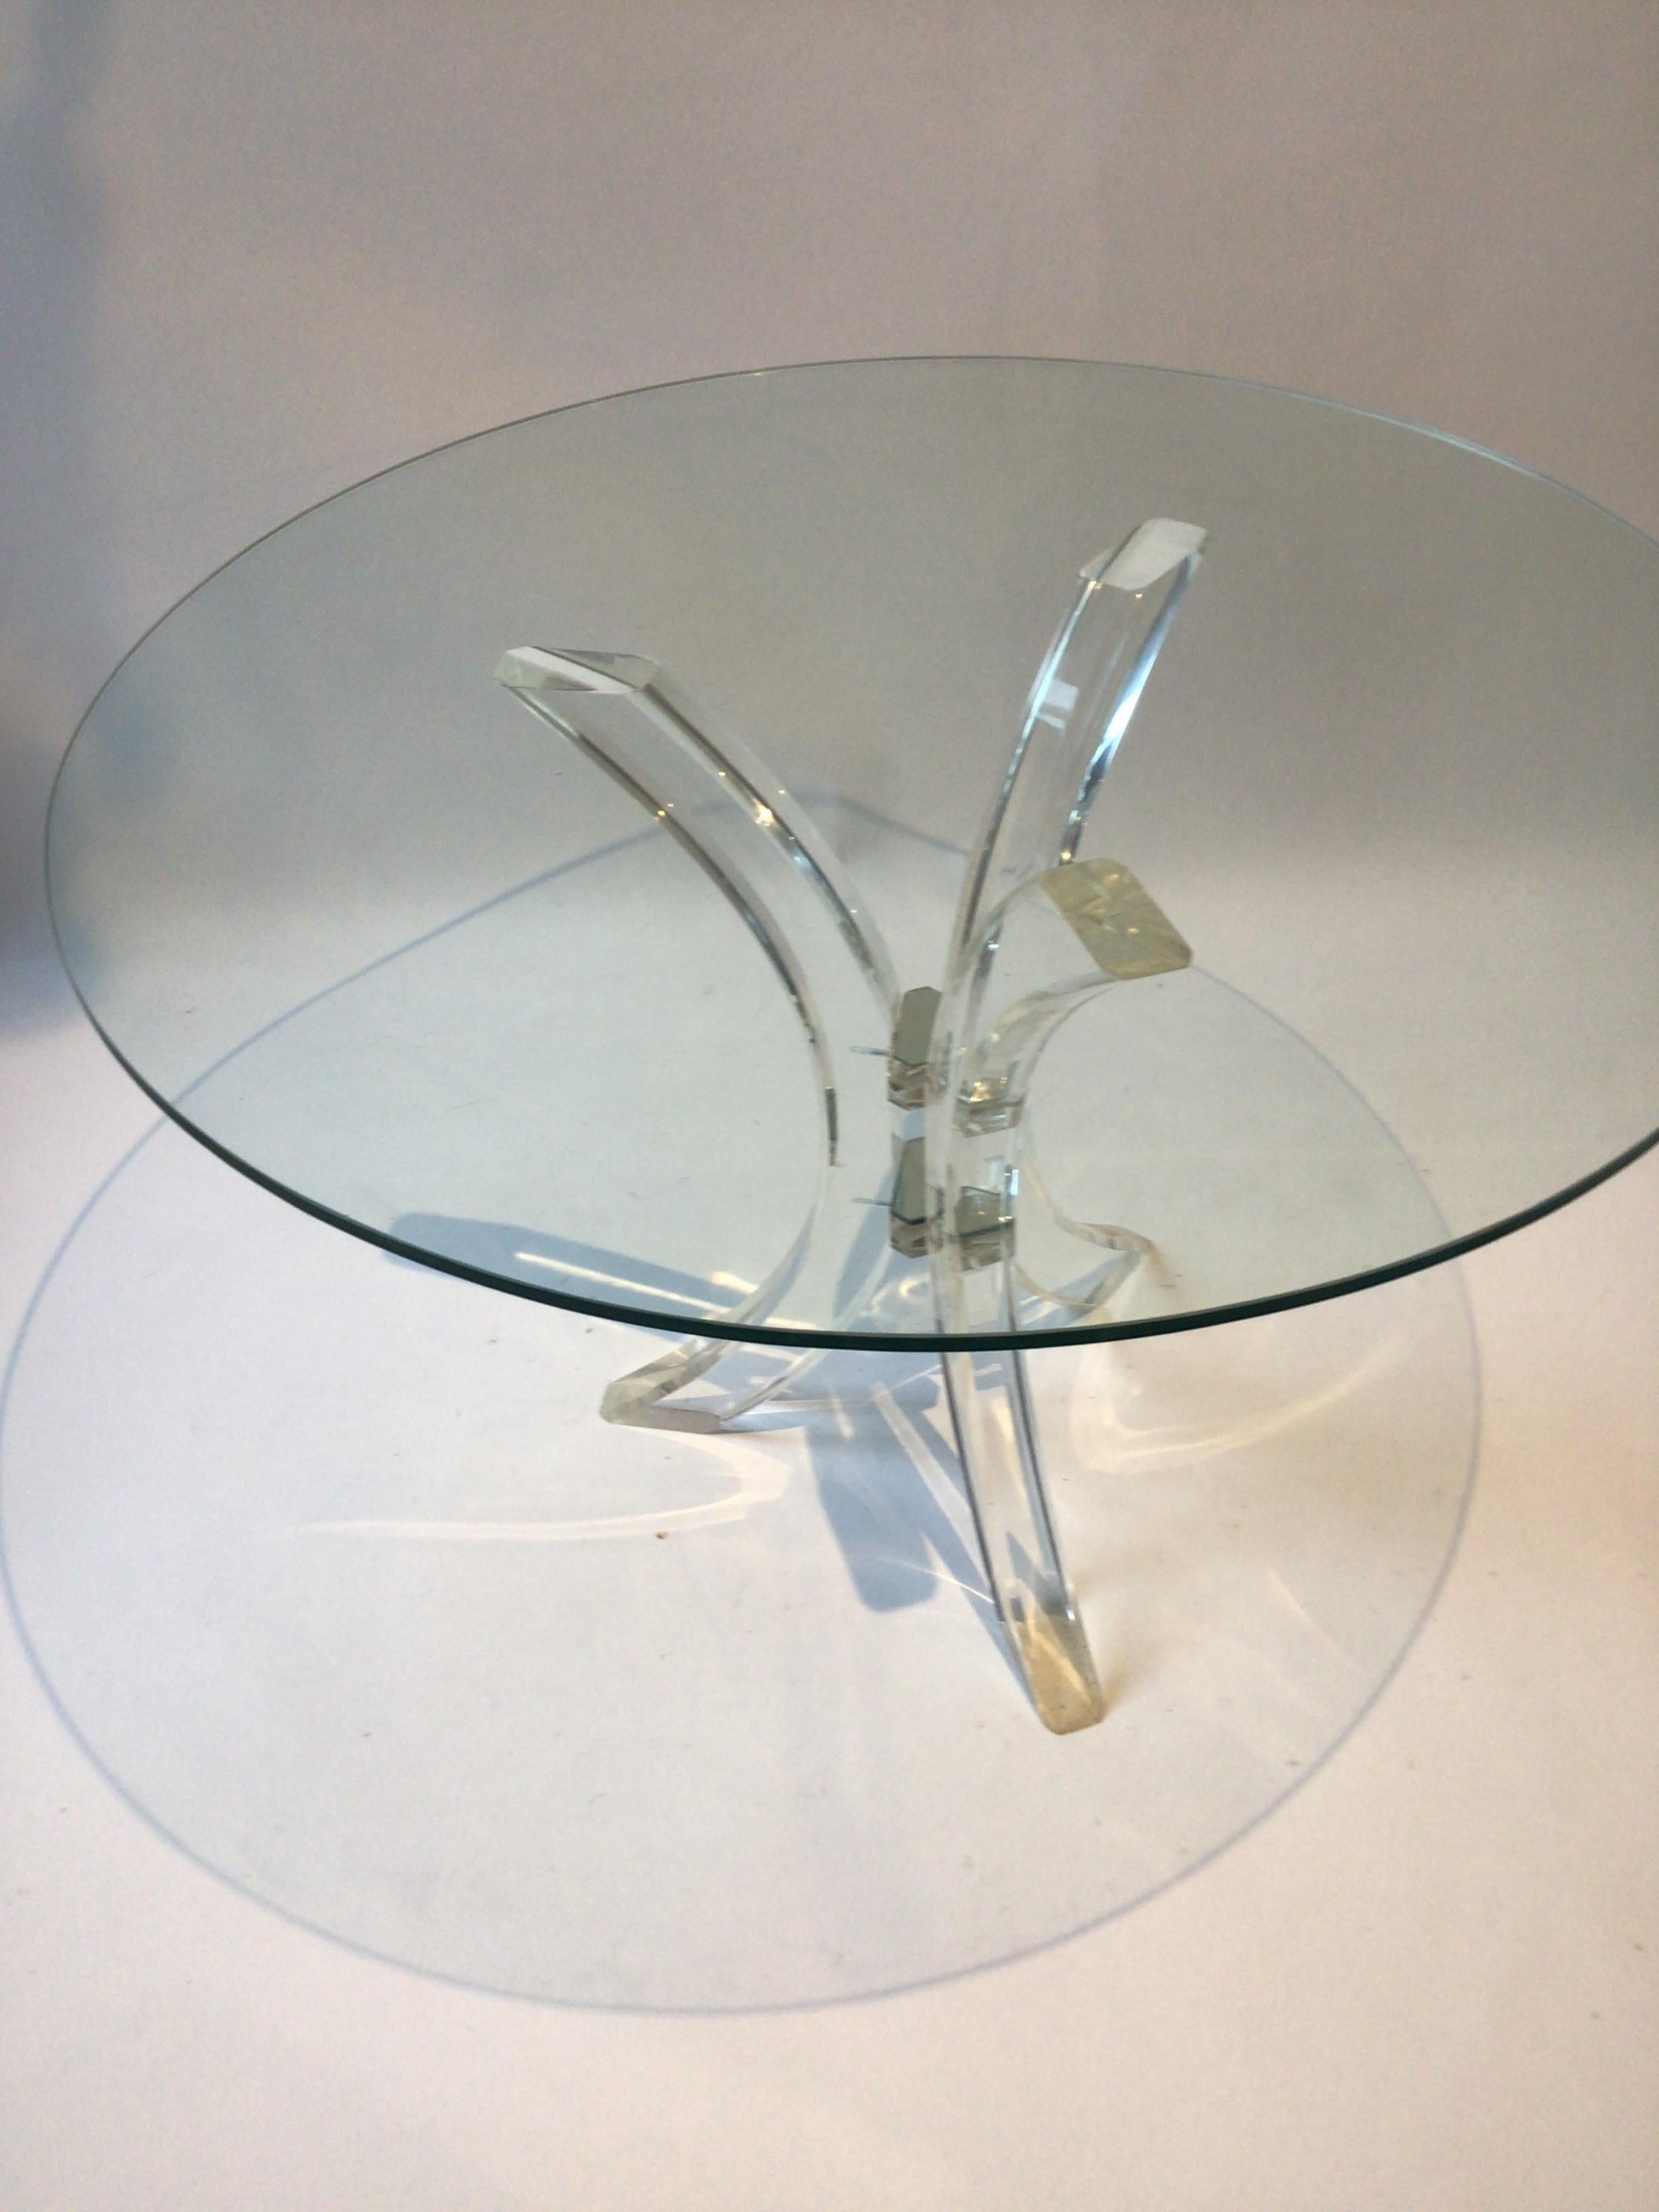 1970s Lucite table with glass top.